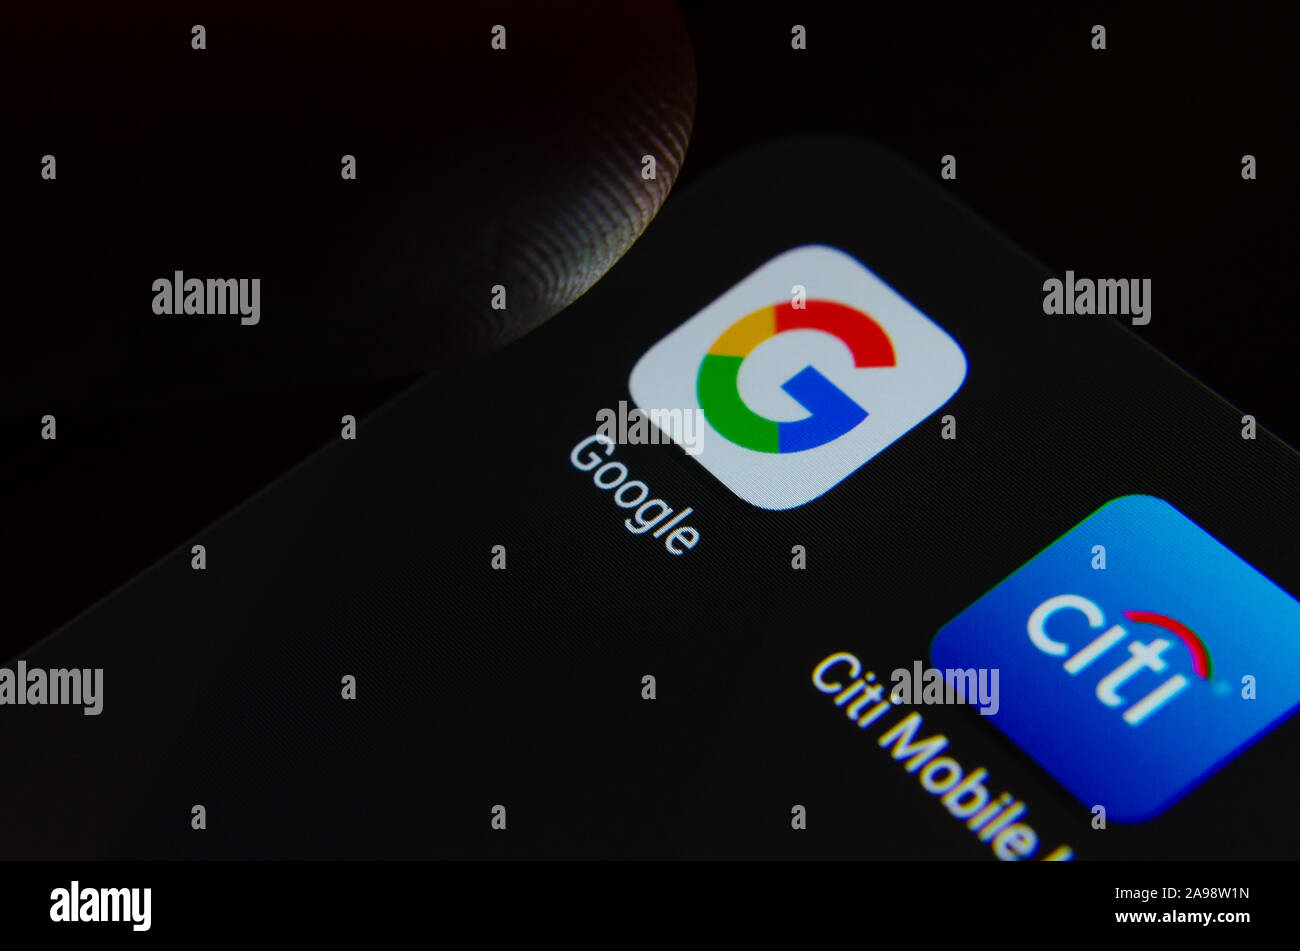 Google and Citibank apps on smartphone screen and a finger over them ready to touch. Macro photo with selective focus. Stock Photo